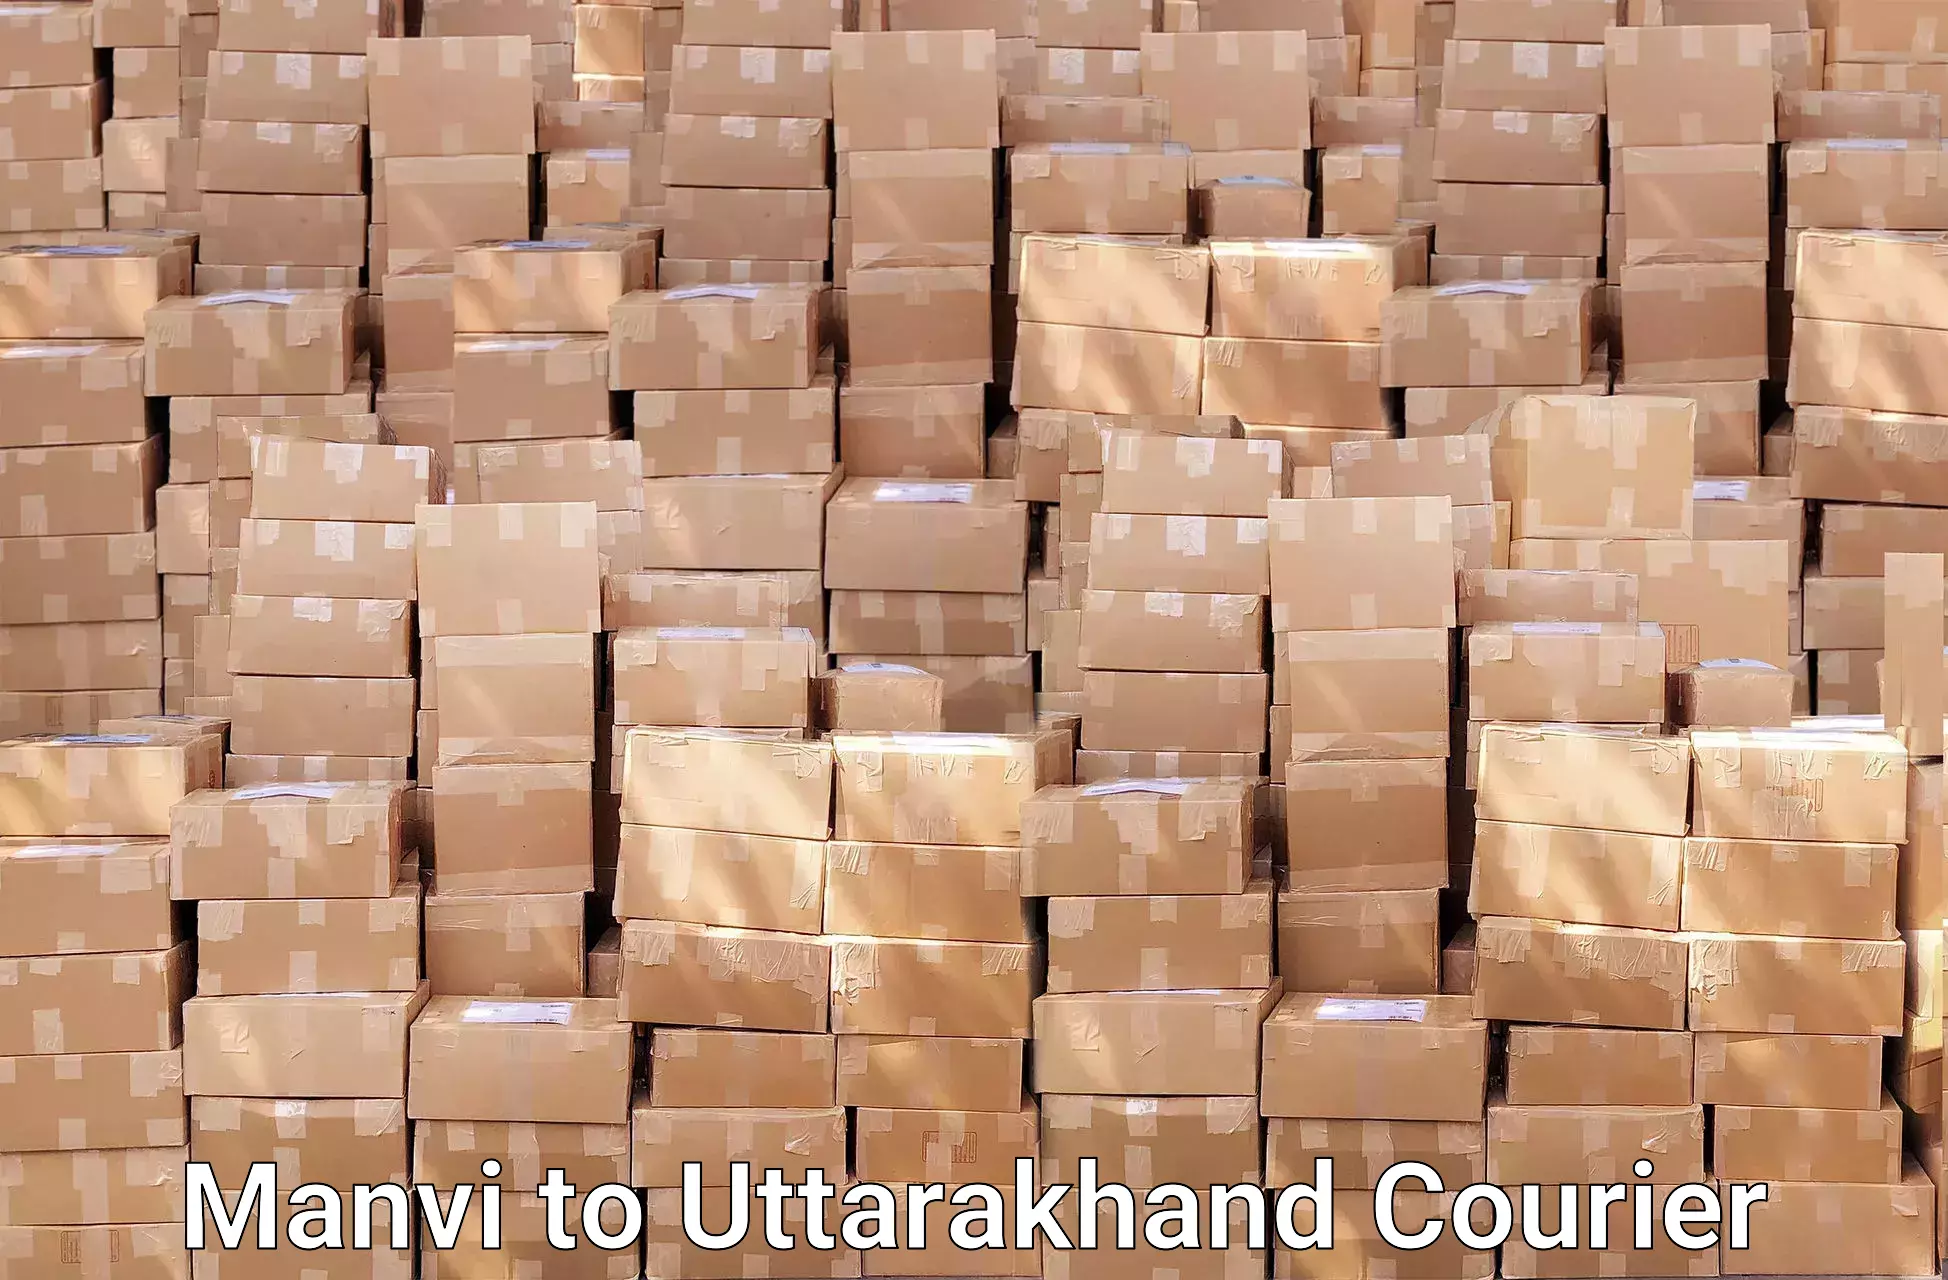 Professional packing services in Manvi to Pithoragarh